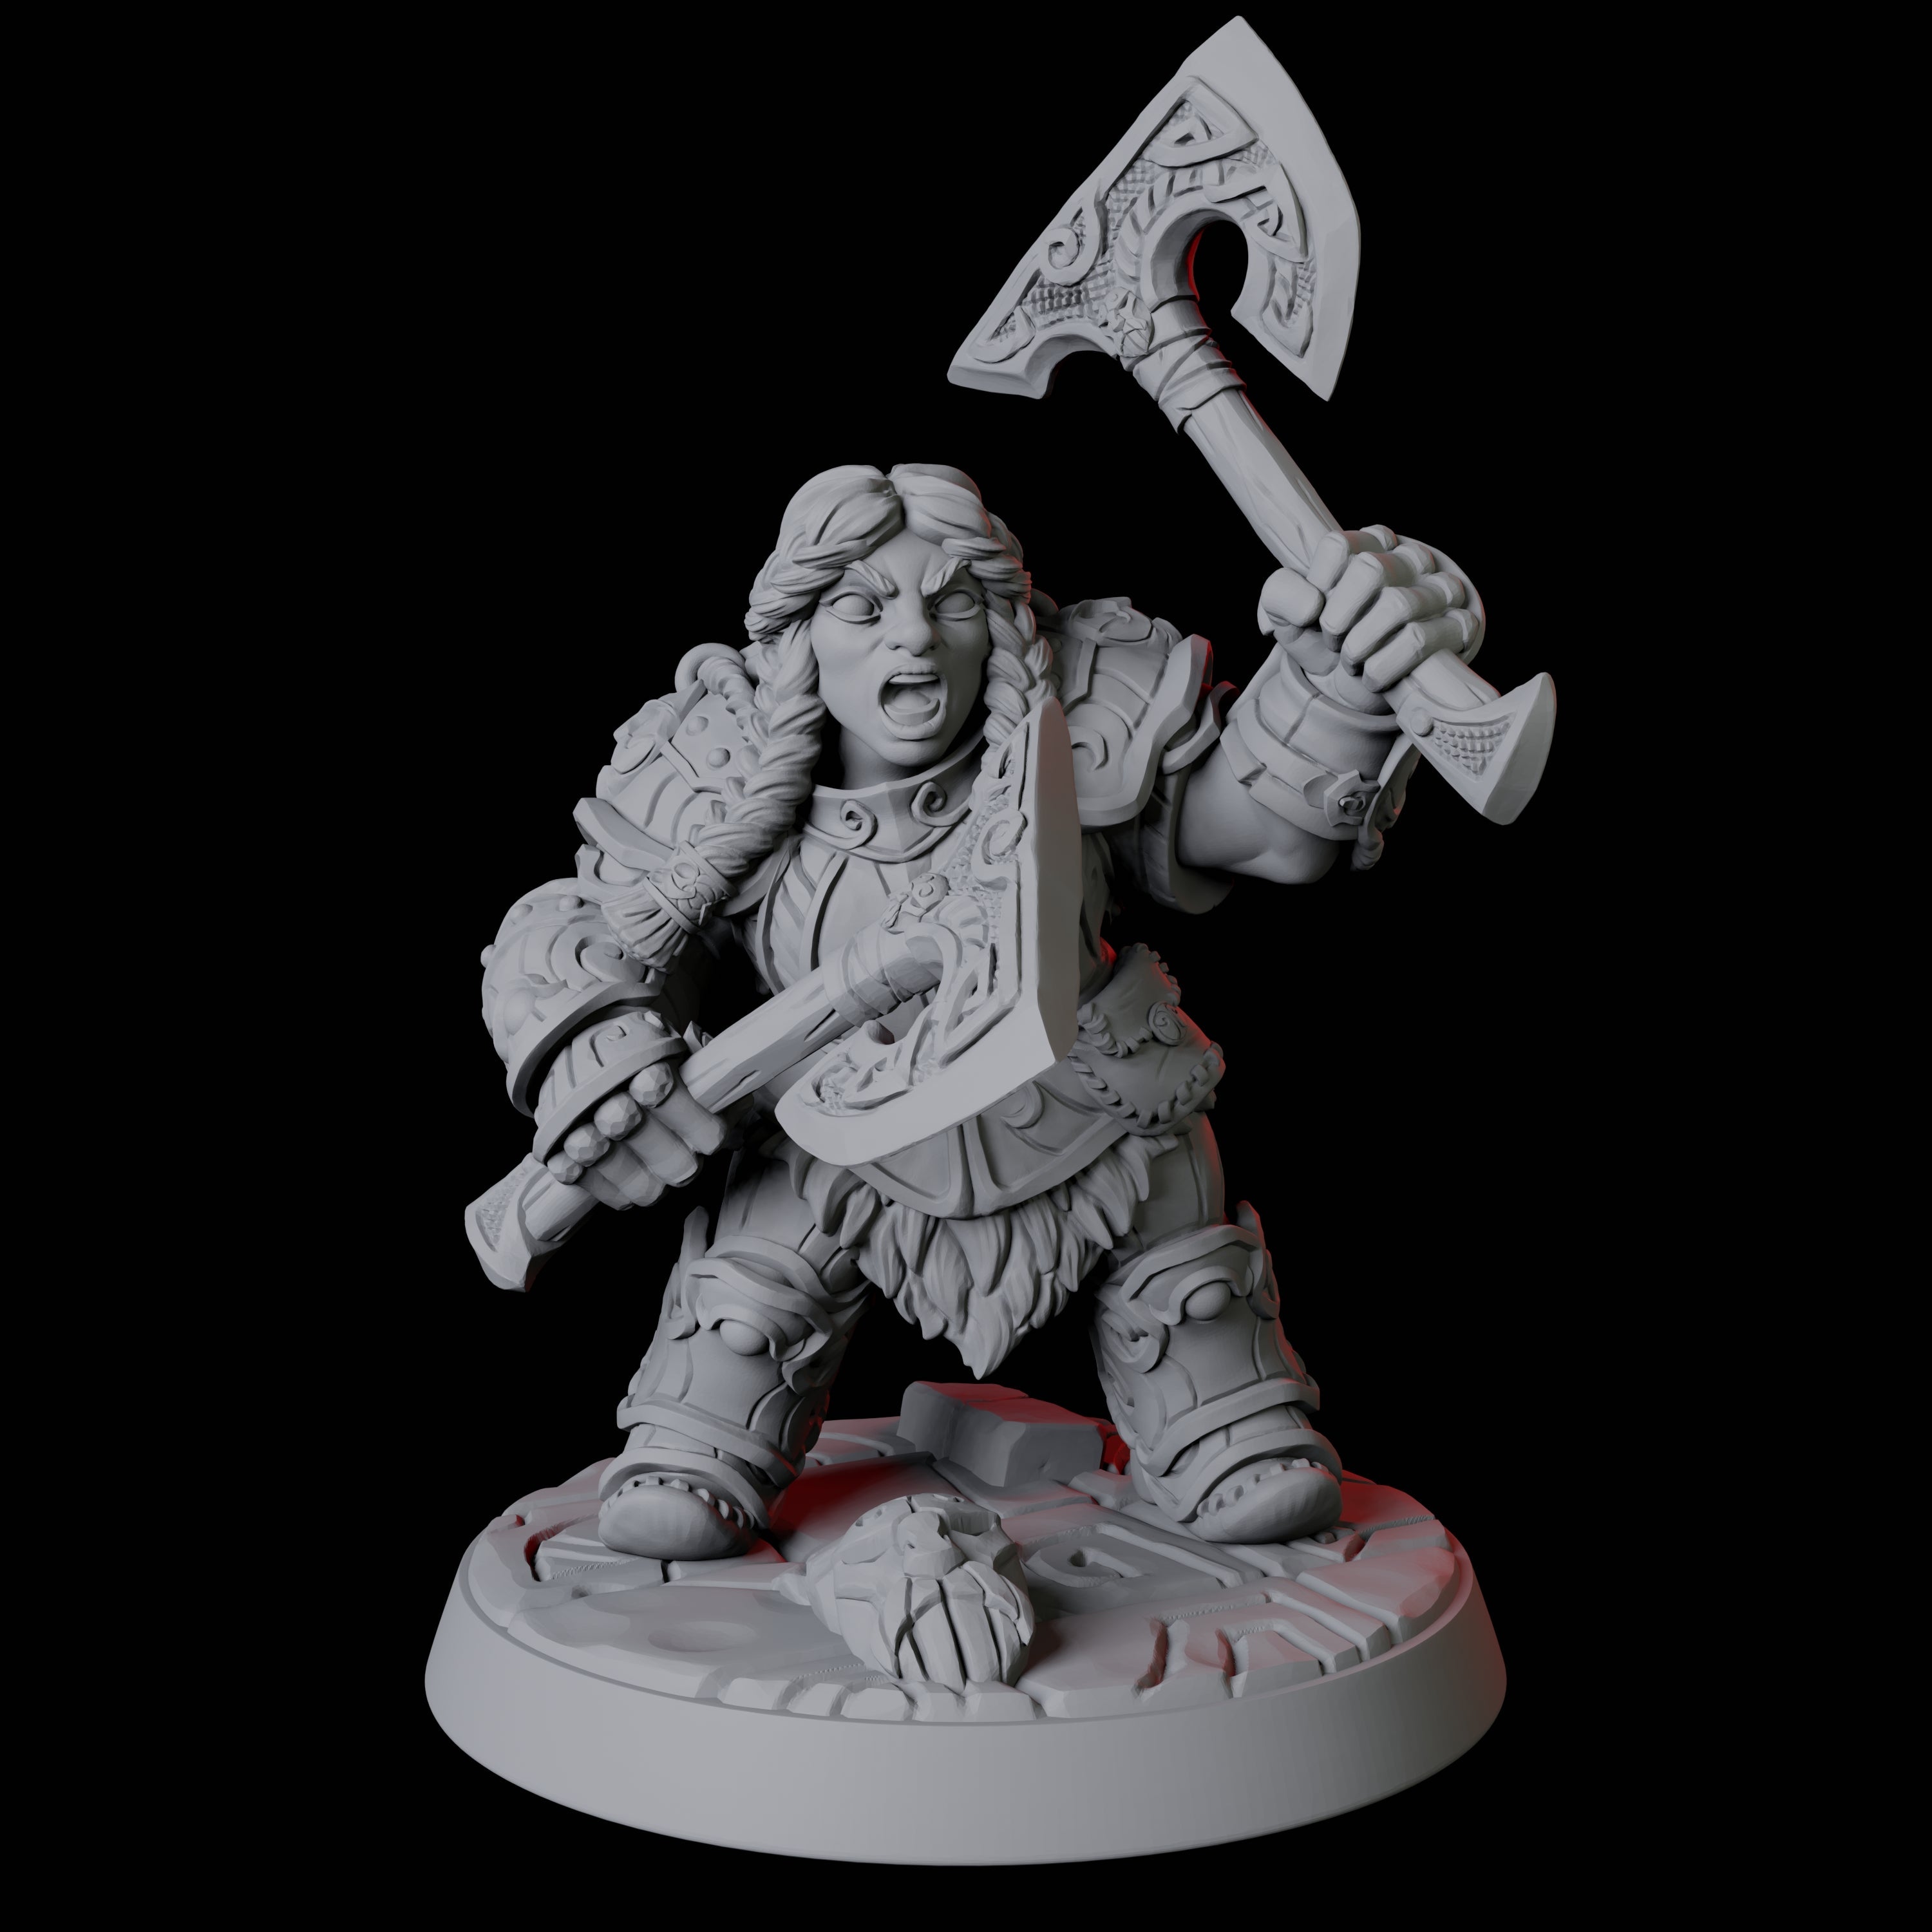 City Guard Dwarf D Miniature for Dungeons and Dragons, Pathfinder or other TTRPGs